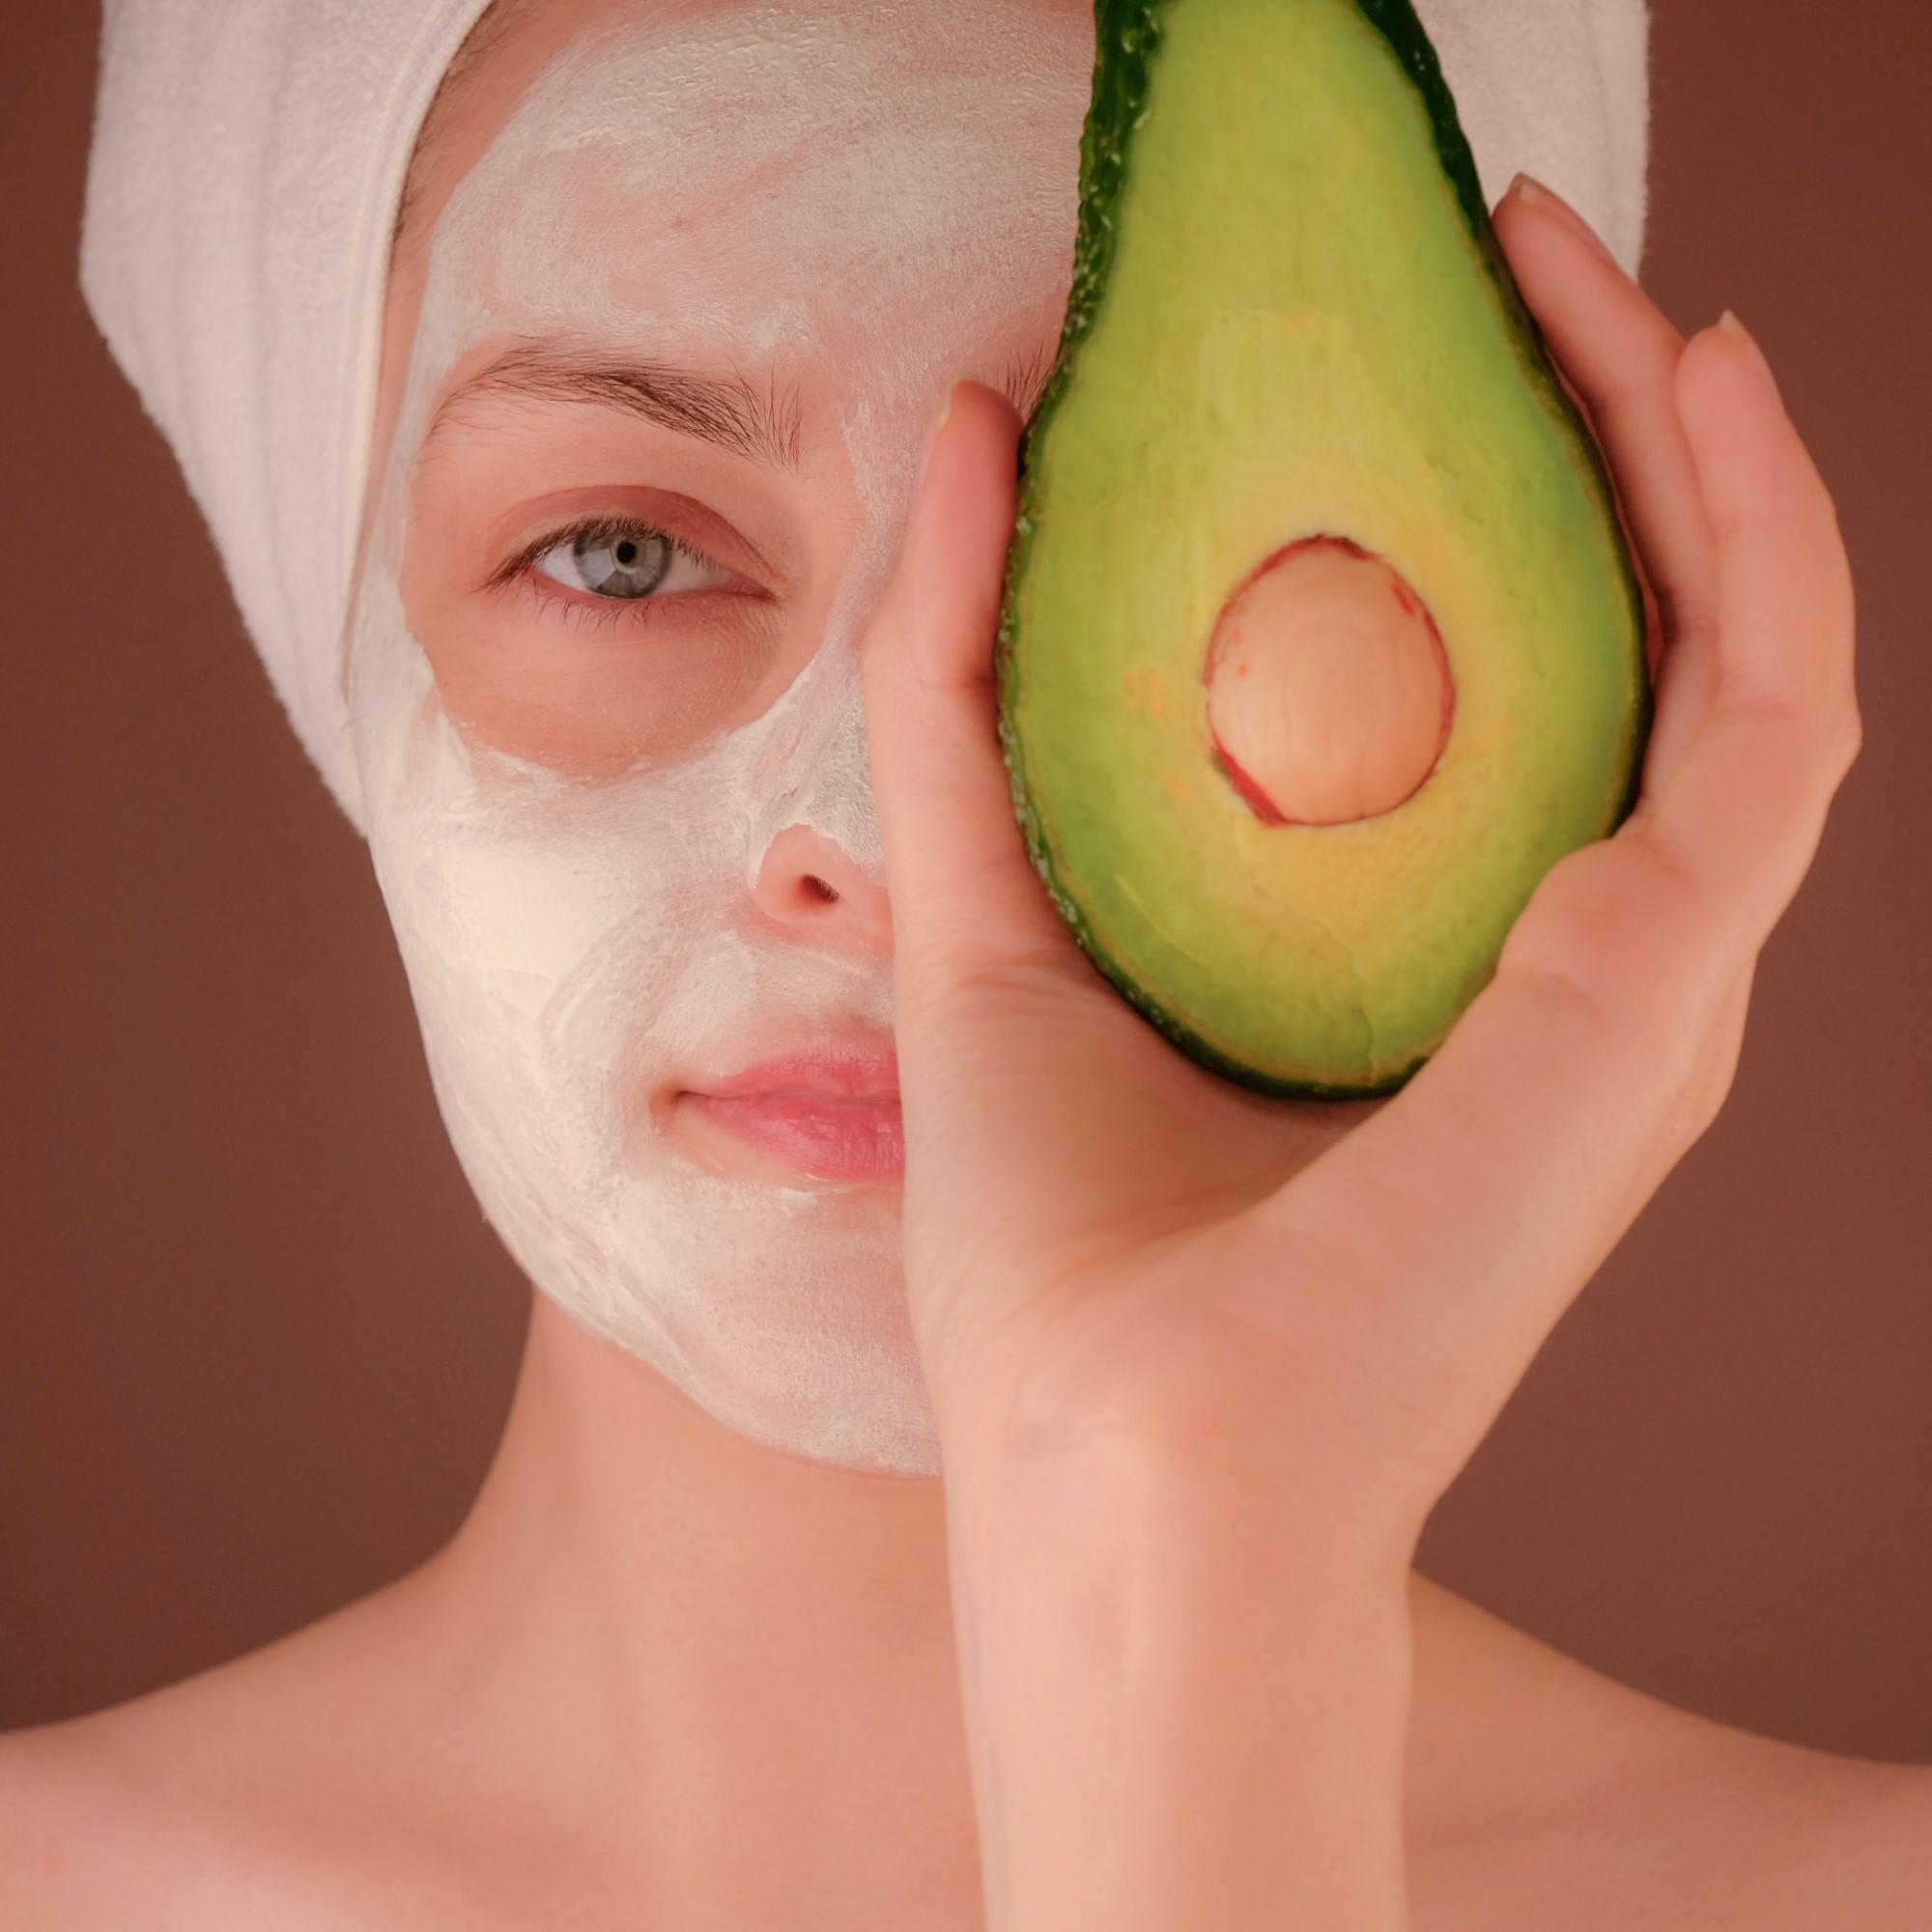 Woman holding half an avocado in front of her eye.